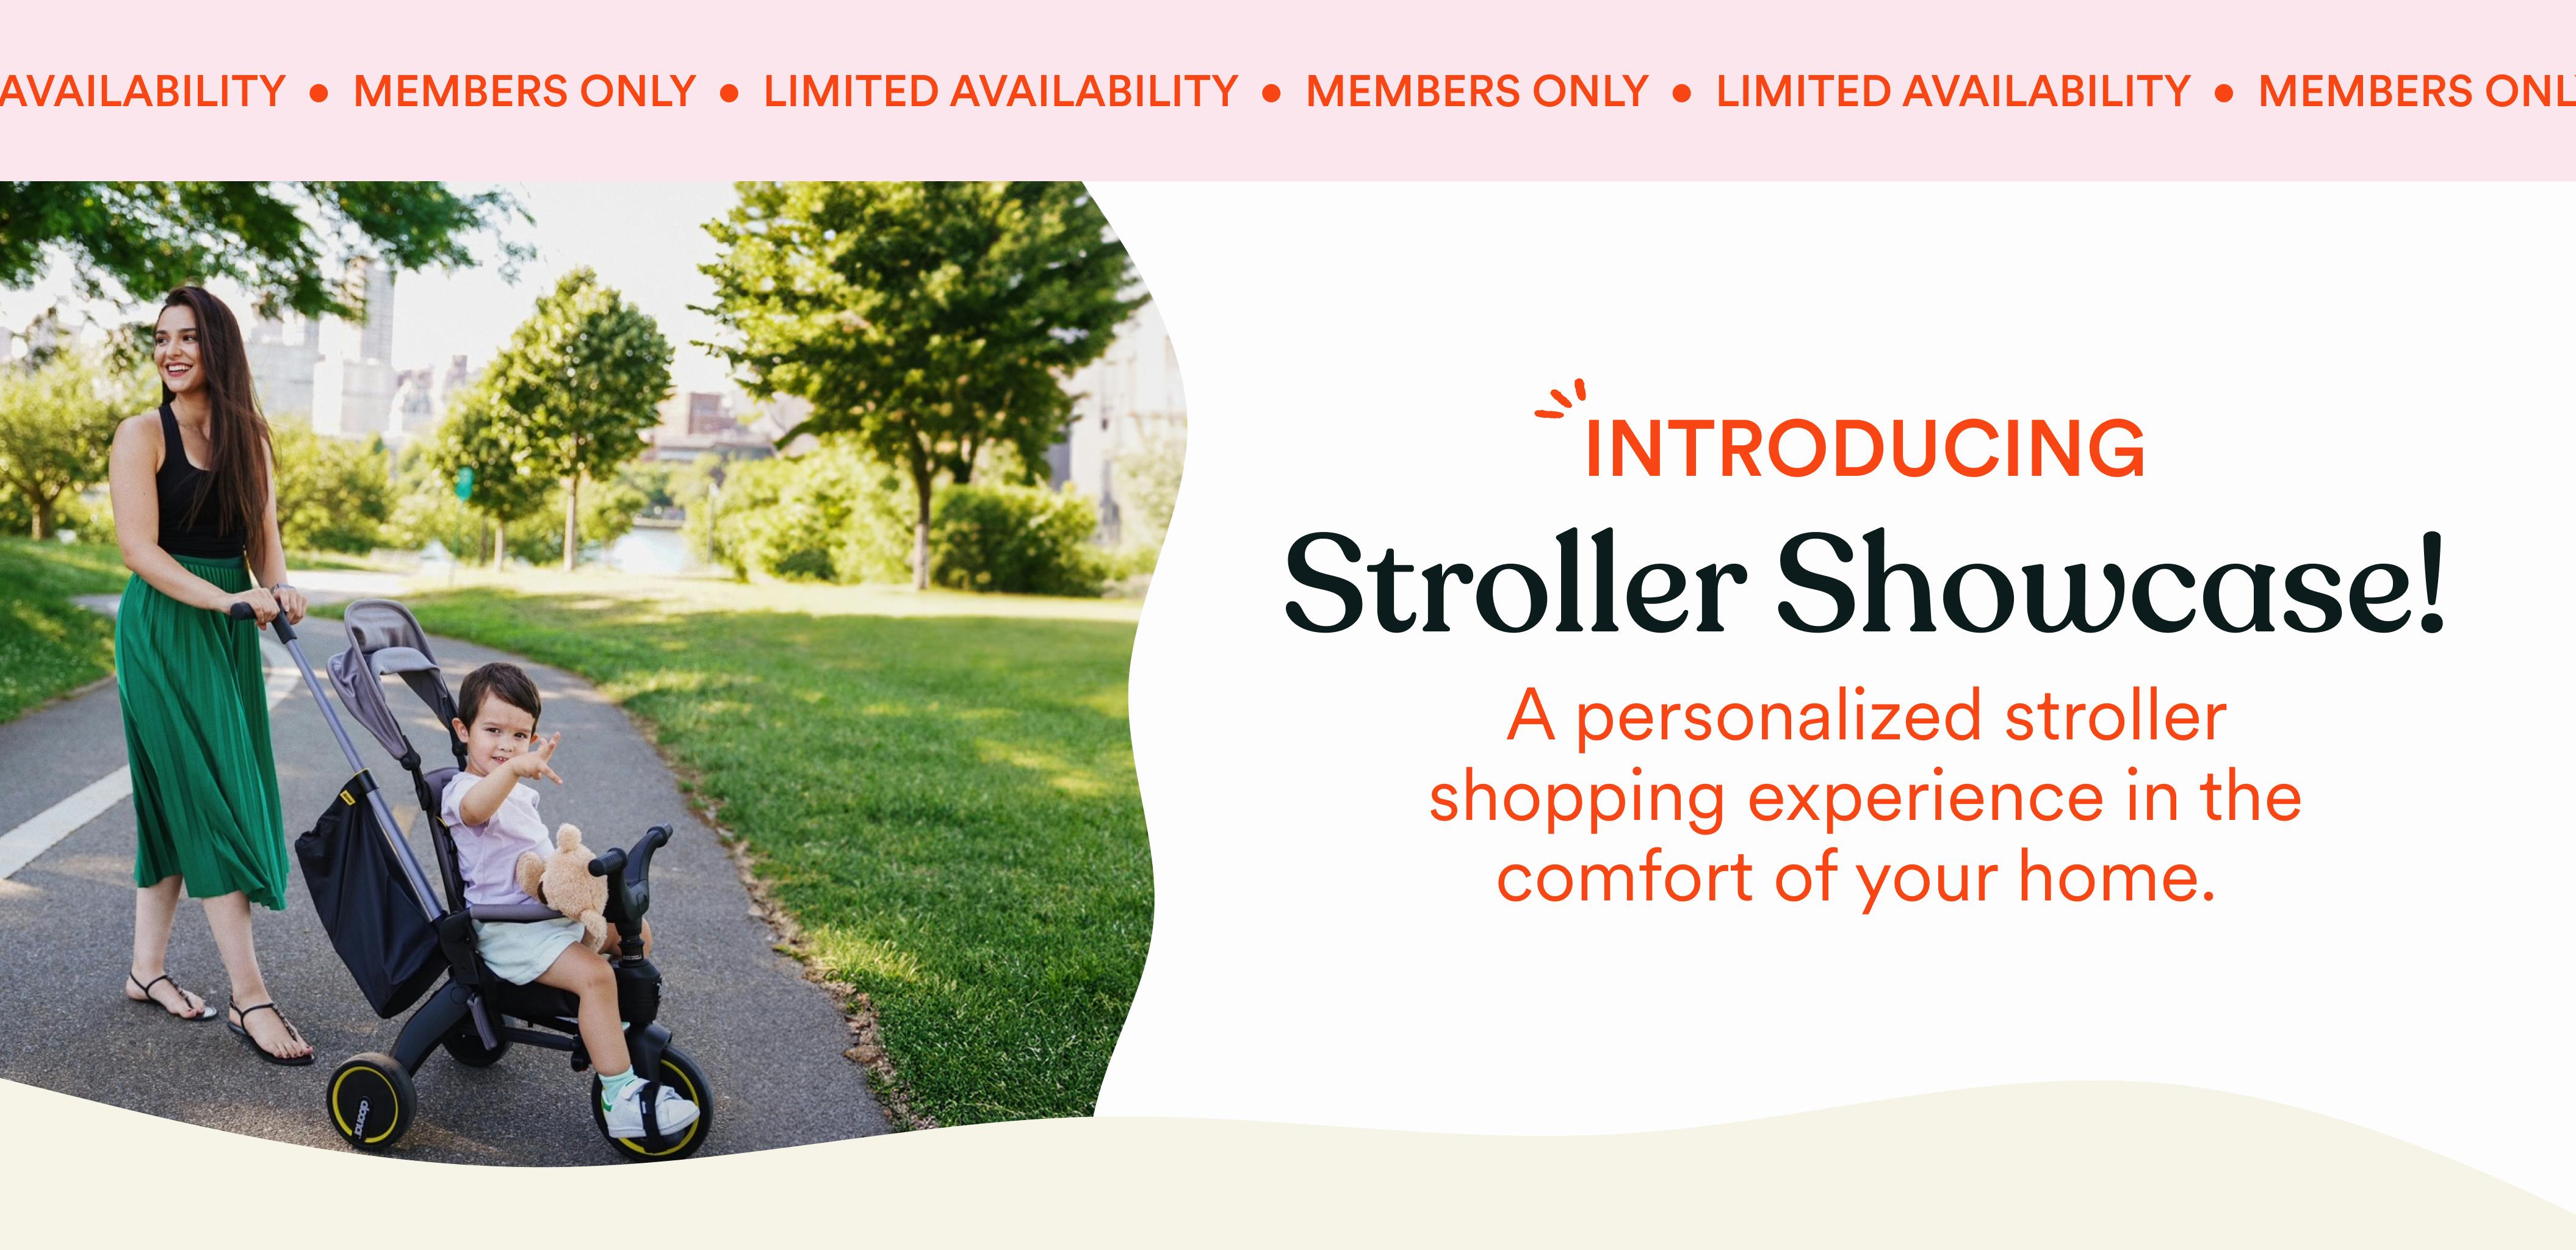 Introducing Stroller Showcase! A personalized stroller shopping experience in the comfort of your home. 